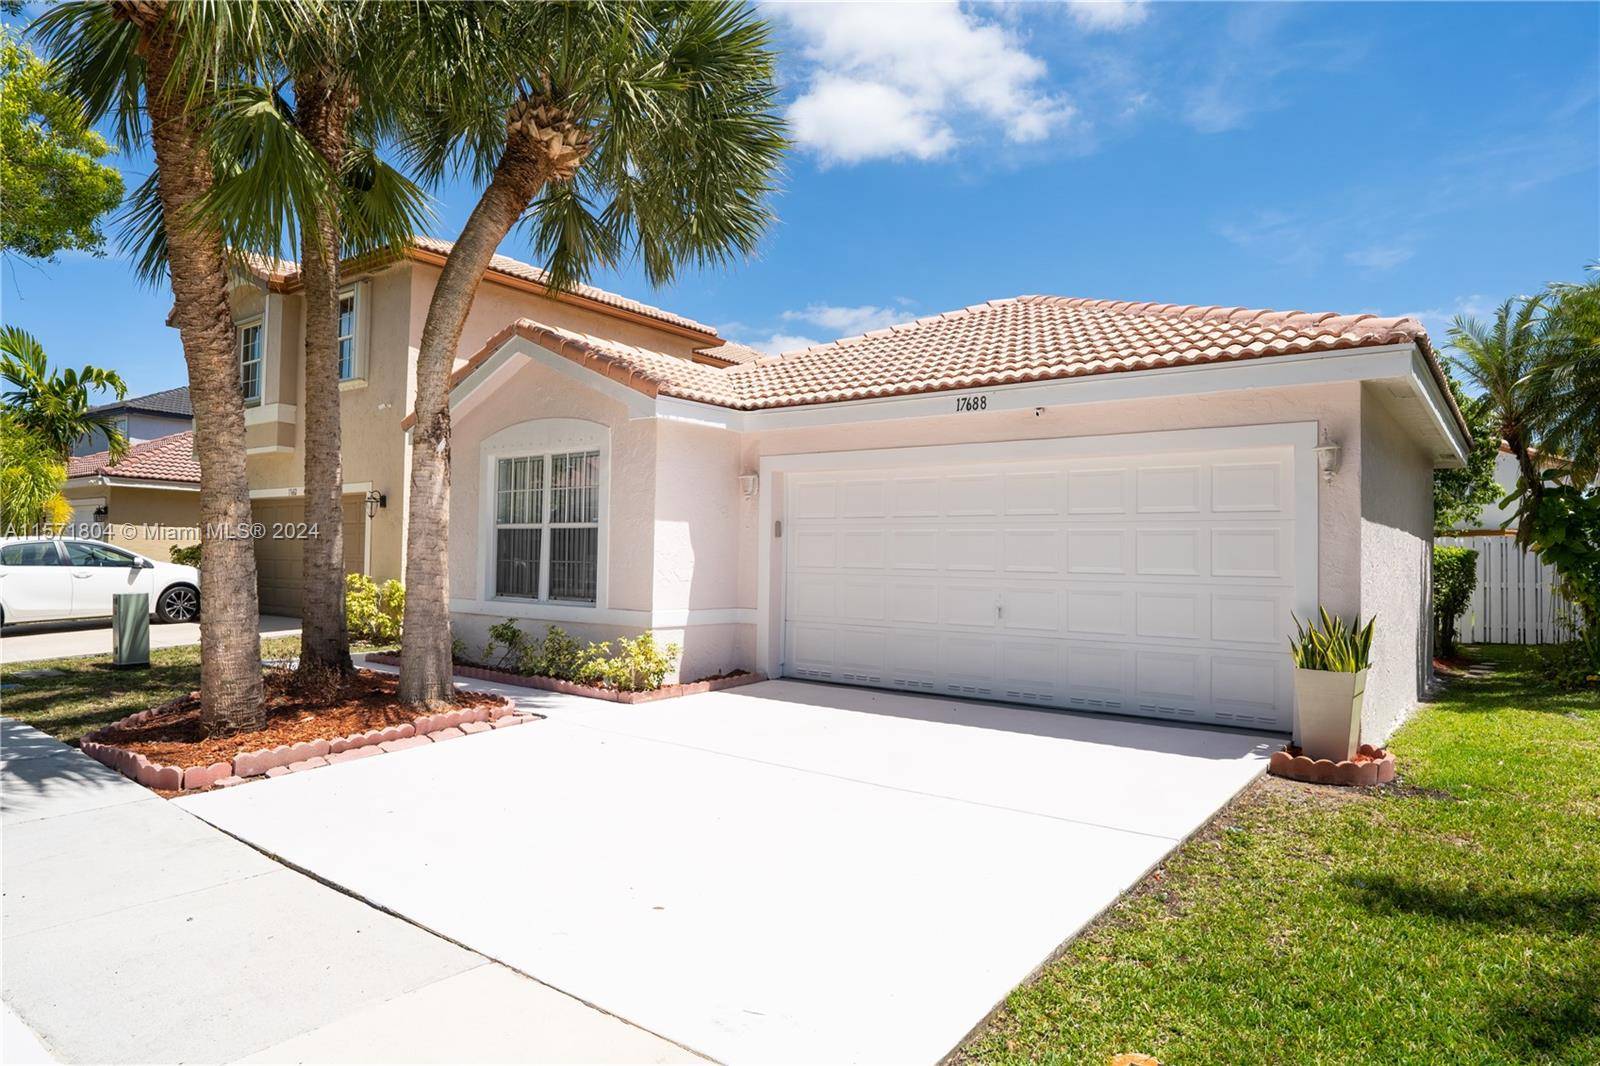 Welcome home ! This amazing property features 4 bedrooms, 2 bathrooms, and is situated in the most family friendly neighborhood of Silver Lakes in Miramar.